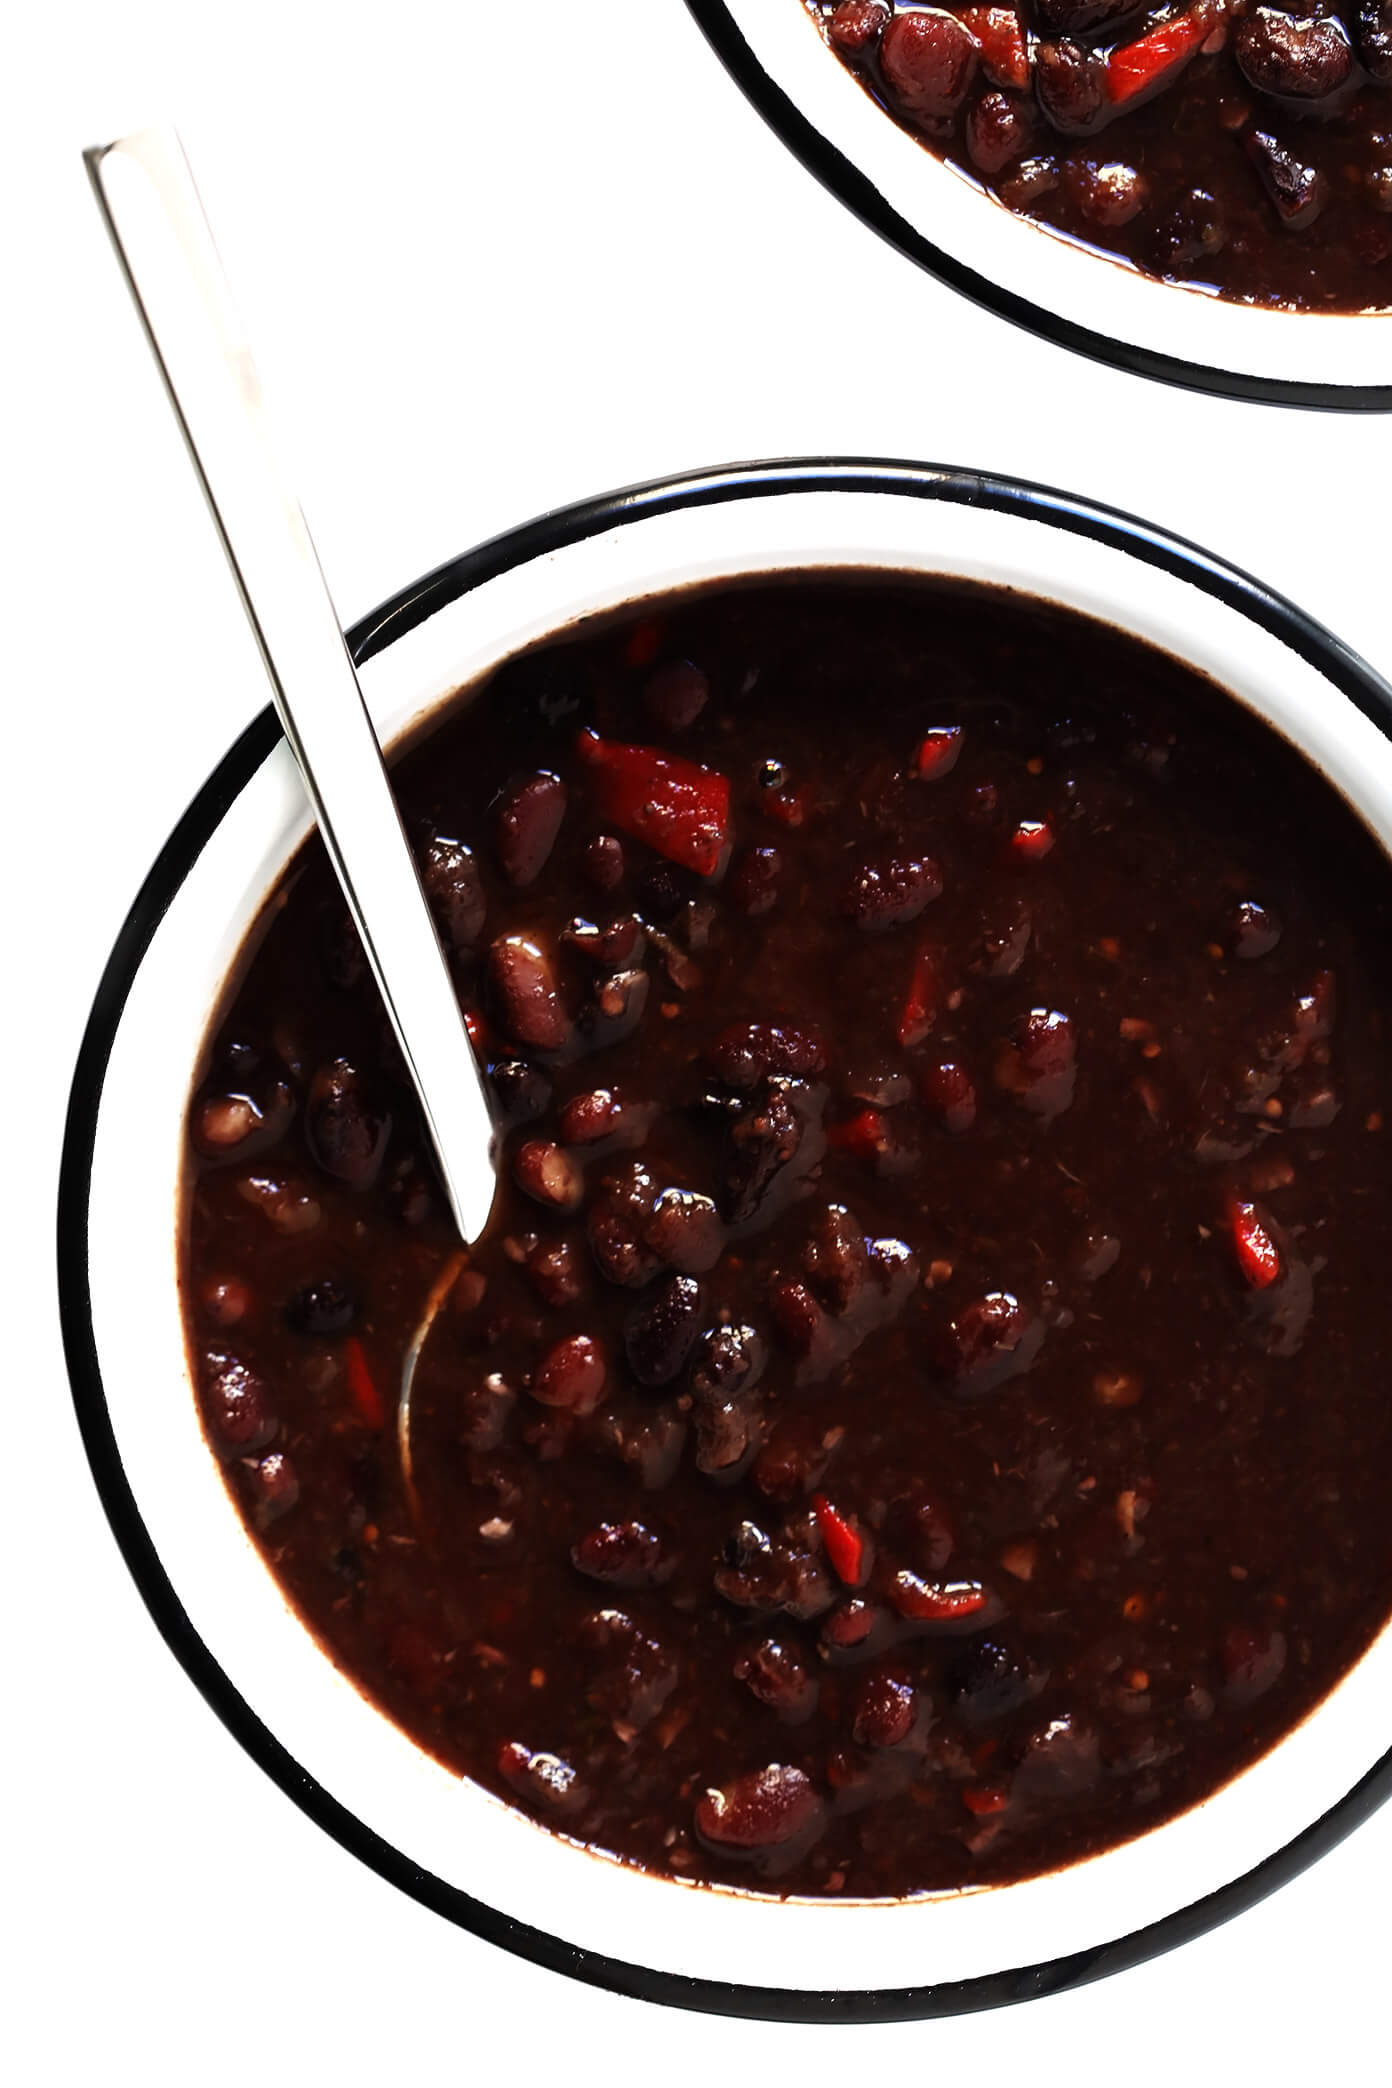 The BEST Black Bean Chili recipe! It's easy to make in the Instant Pot or Crock-Pot or stovetop, it's naturally gluten-free, vegan and vegetarian, and it's full of the most delicious zesty Mexican flavors. | Gimme Some Oven #blackbeanchili #mealprep #vegetarianchili #veganchili #instantpotchili